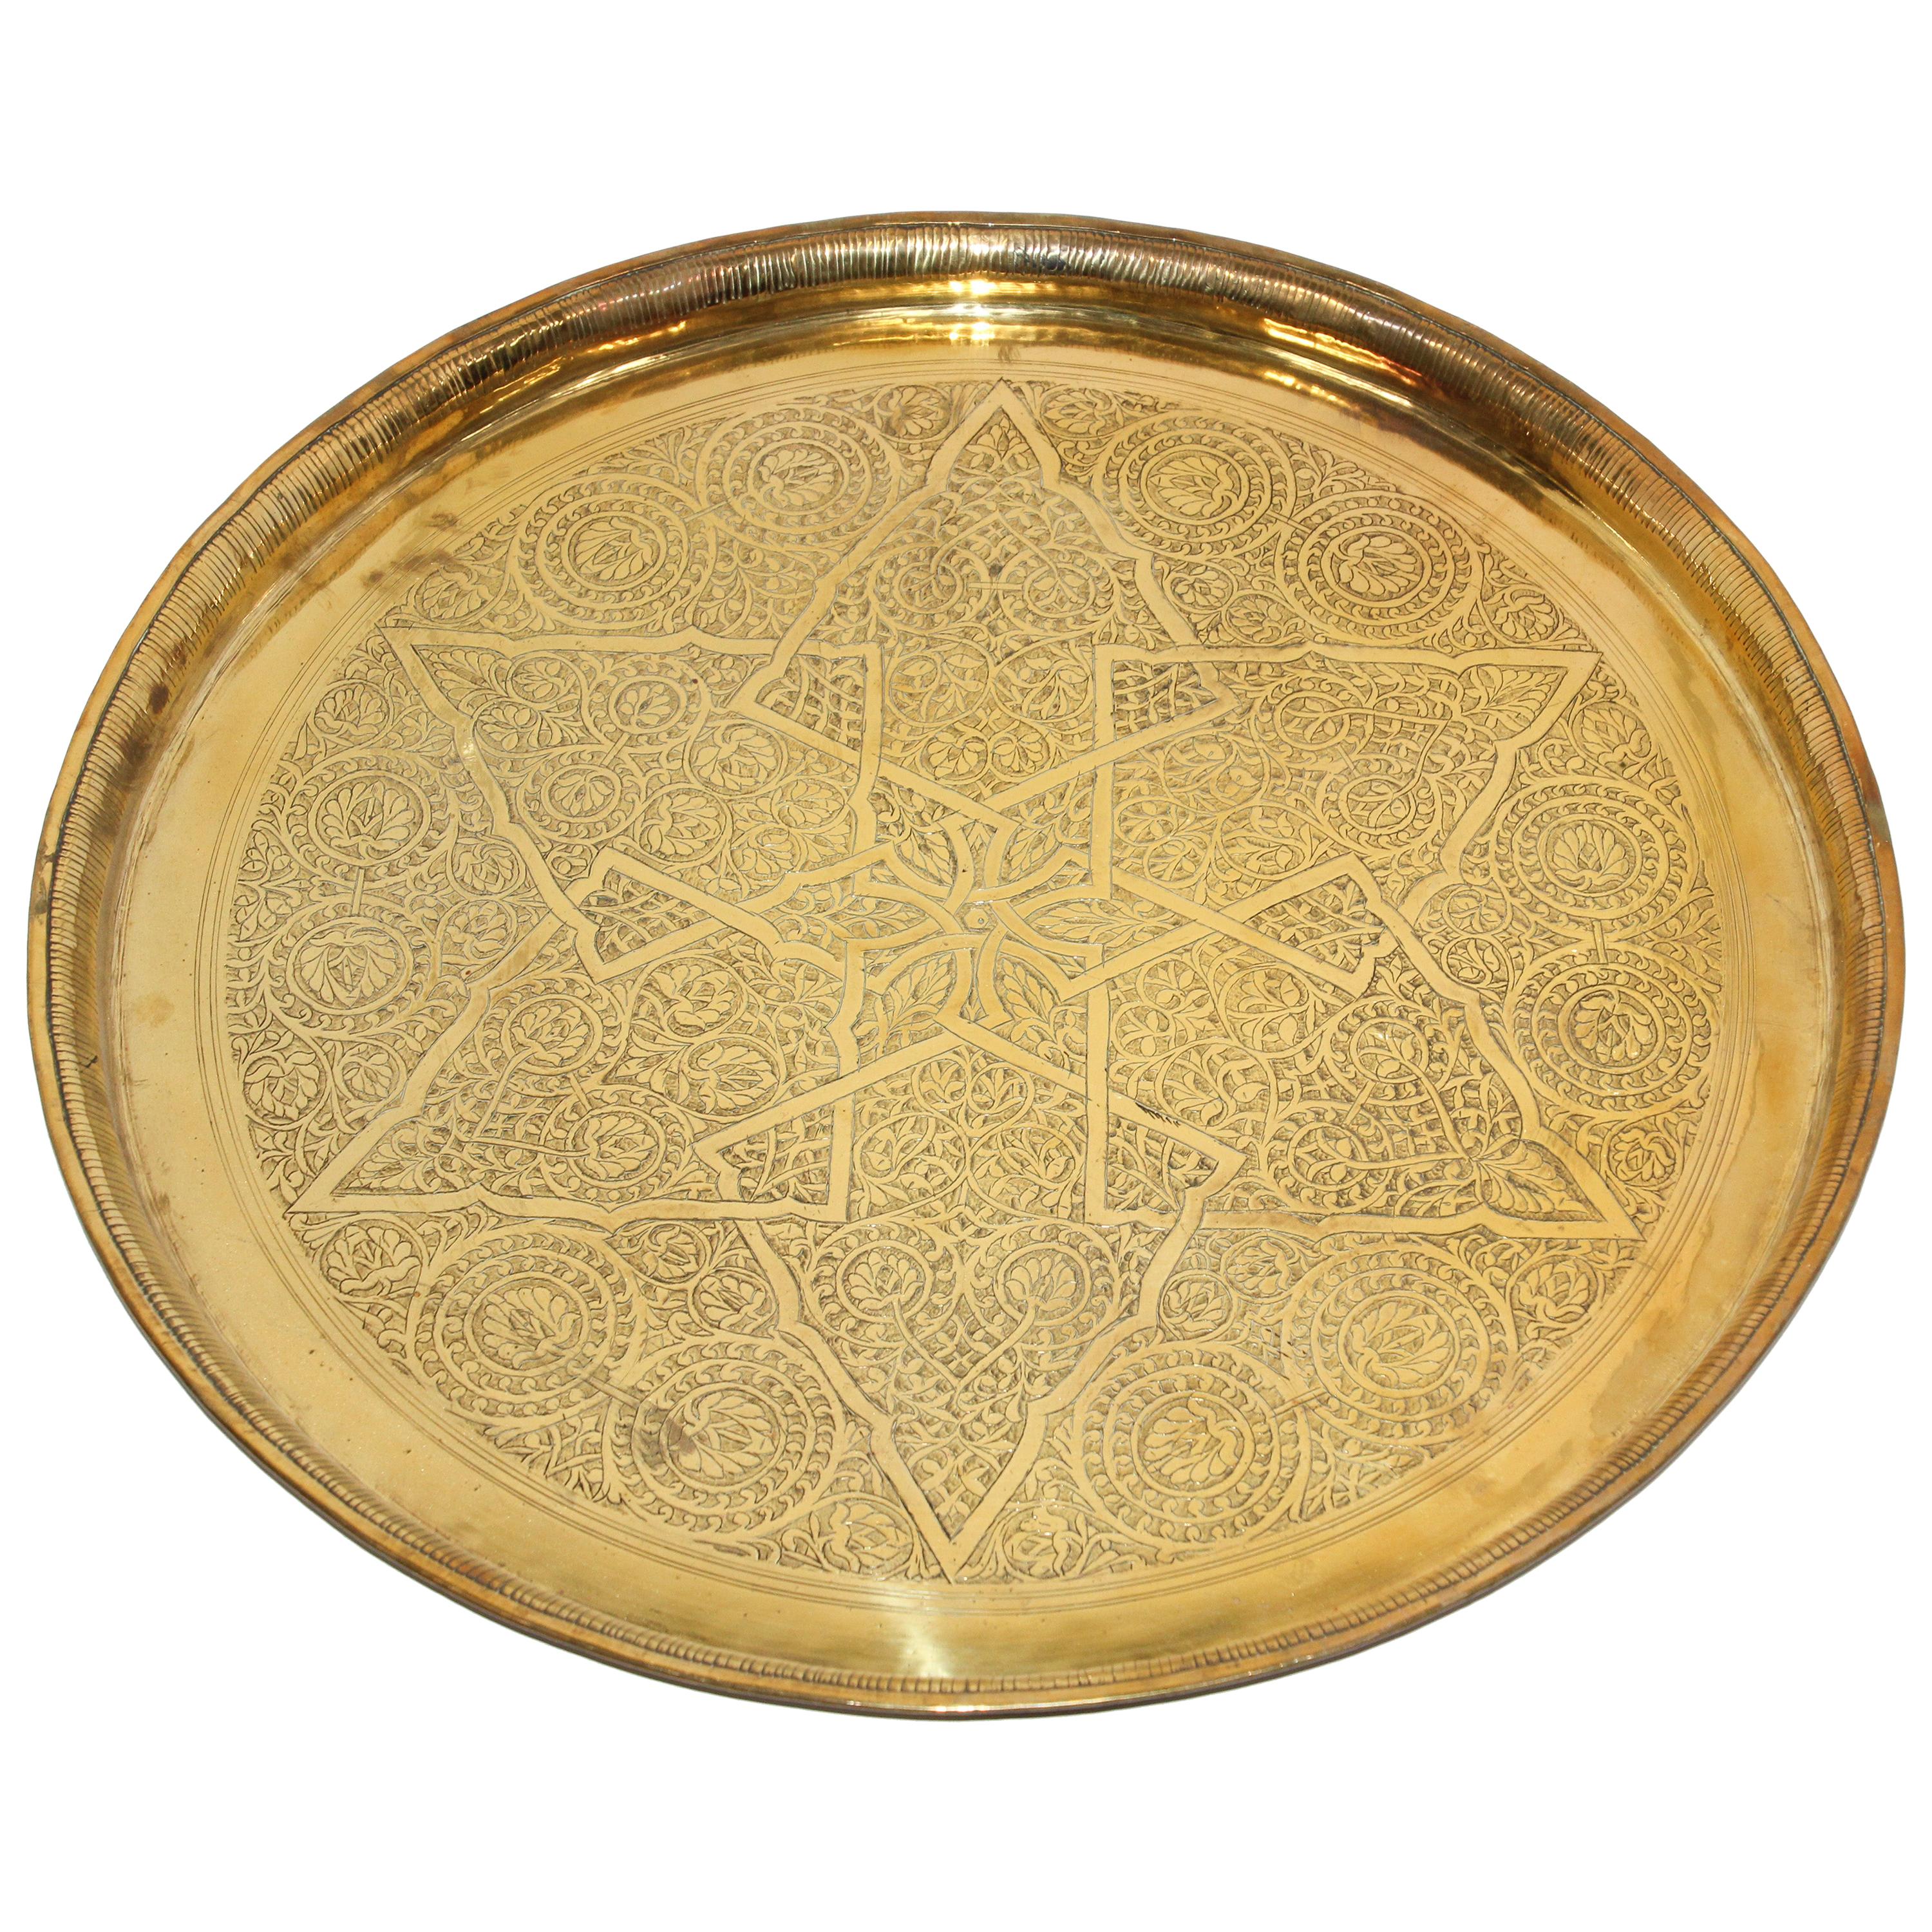 https://a.1stdibscdn.com/middle-eastern-antique-round-brass-tray-for-sale/1121189/f_179289521581699176516/17928952_master.jpg